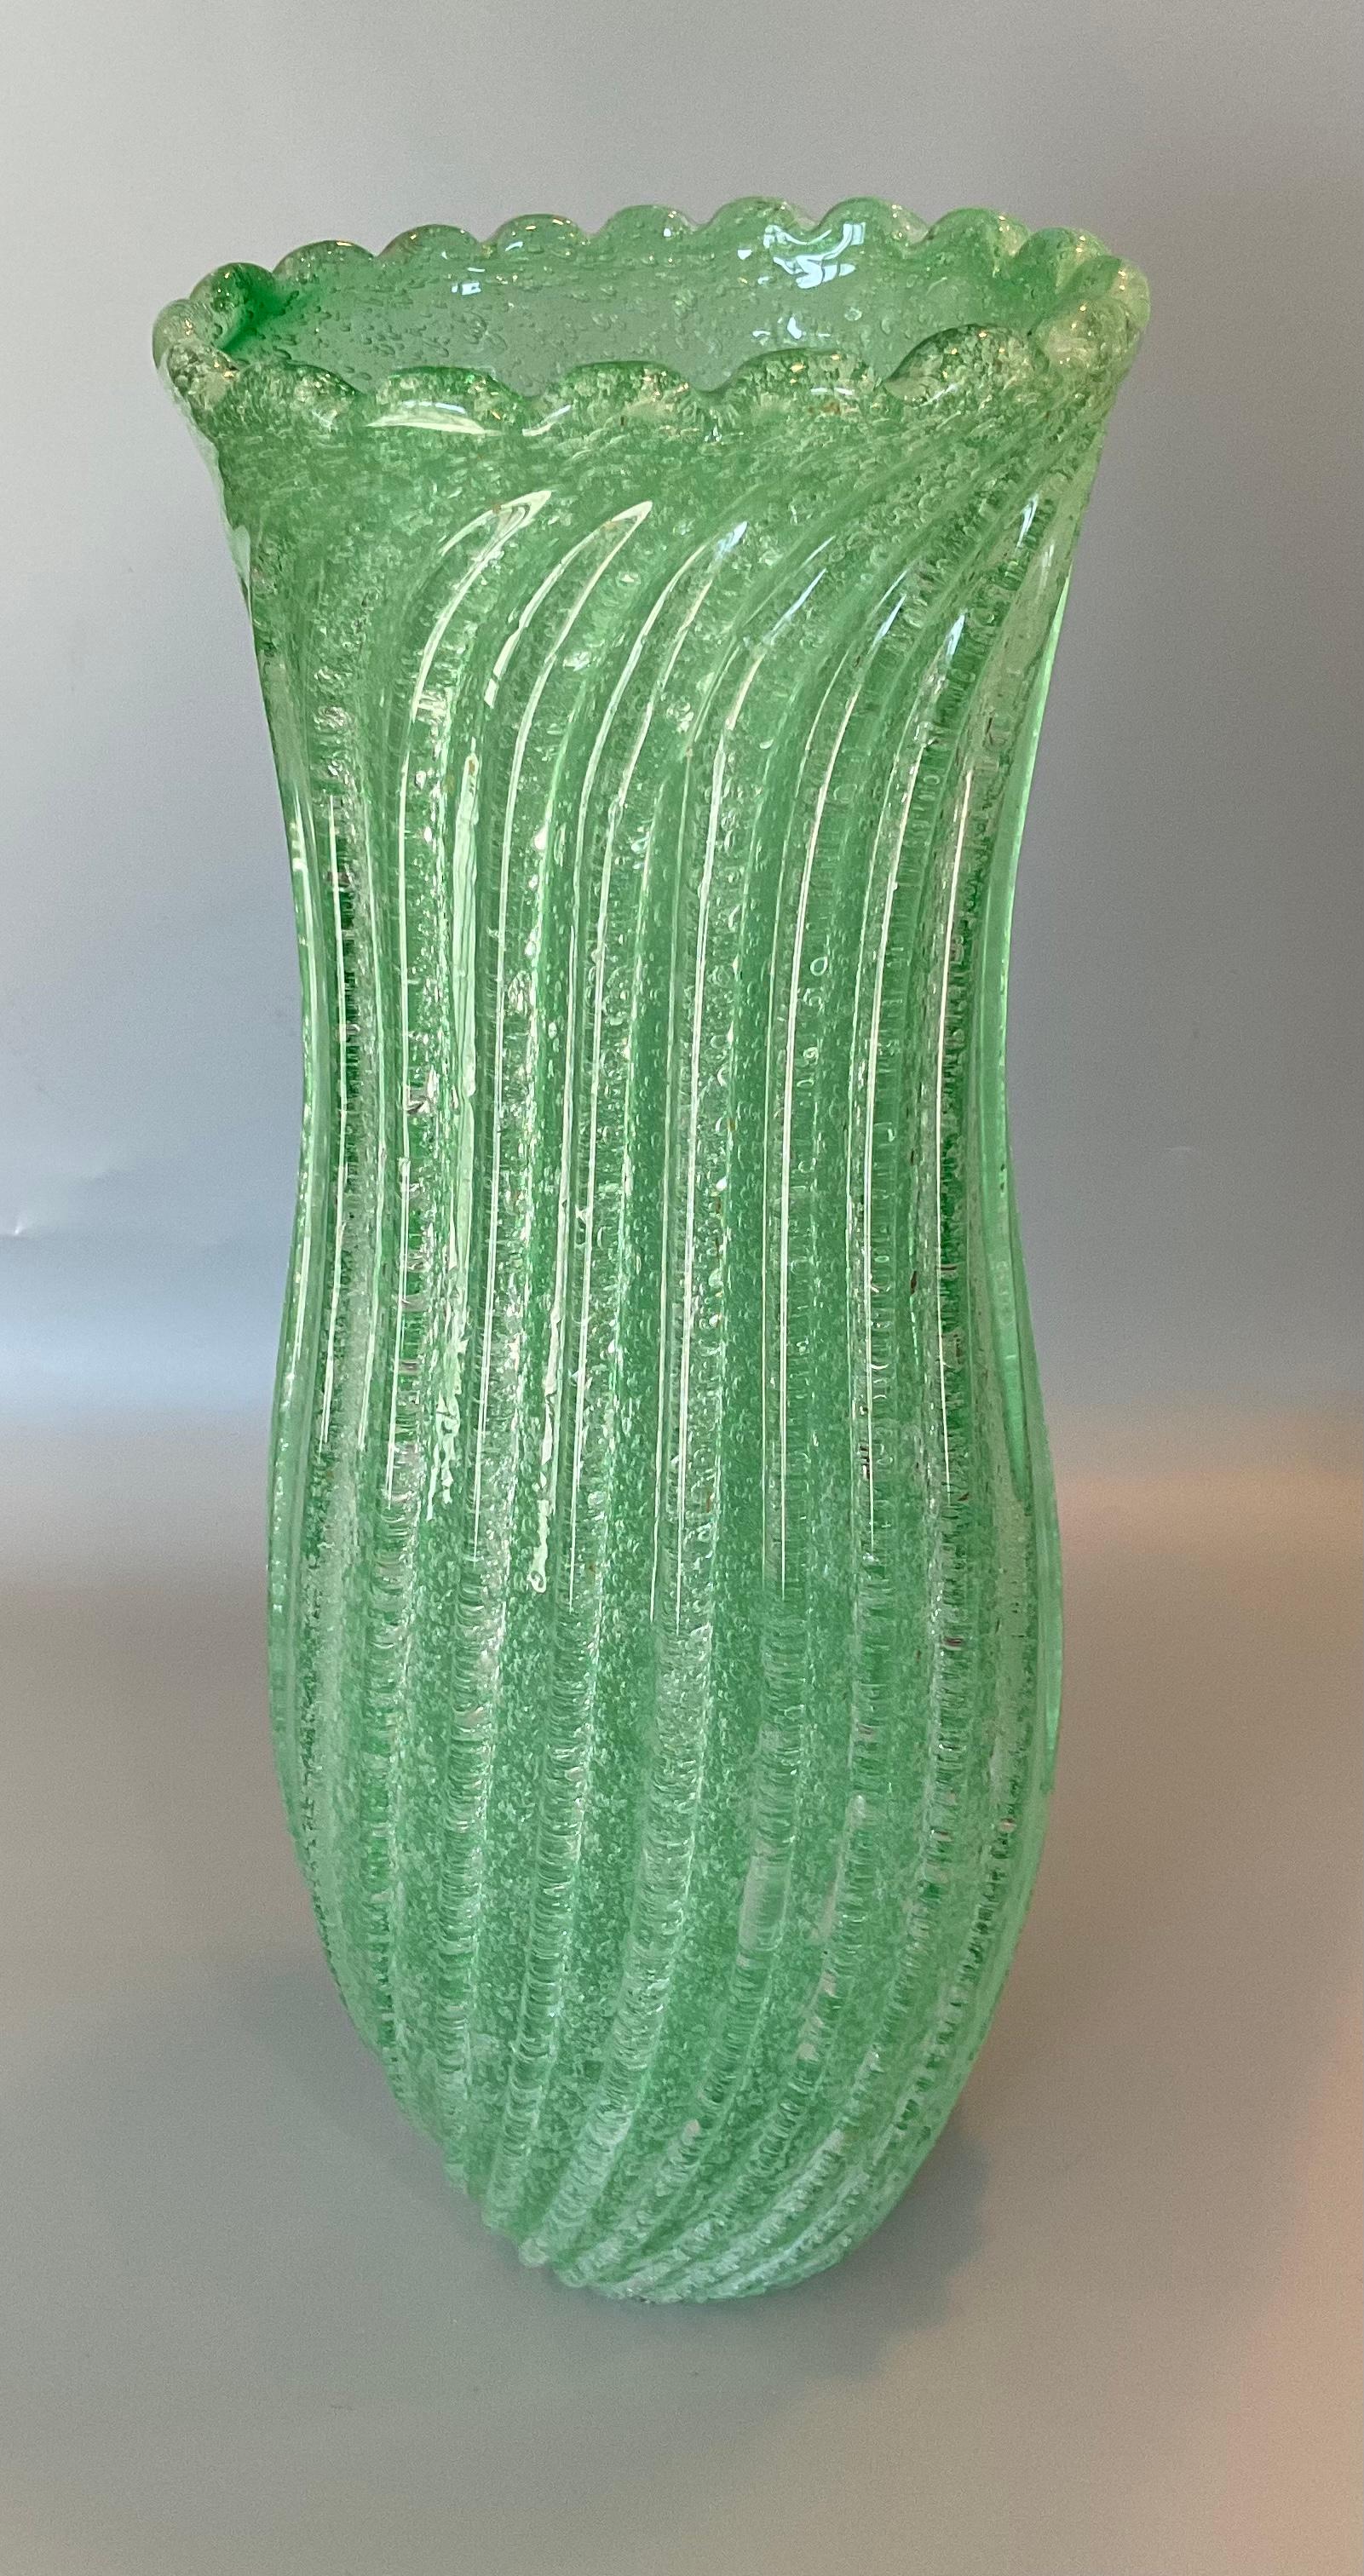 Mid-20th Century Large Murano Art Glass Vase in Green Pulegoso Glass with Ribbed Design Scalloped For Sale